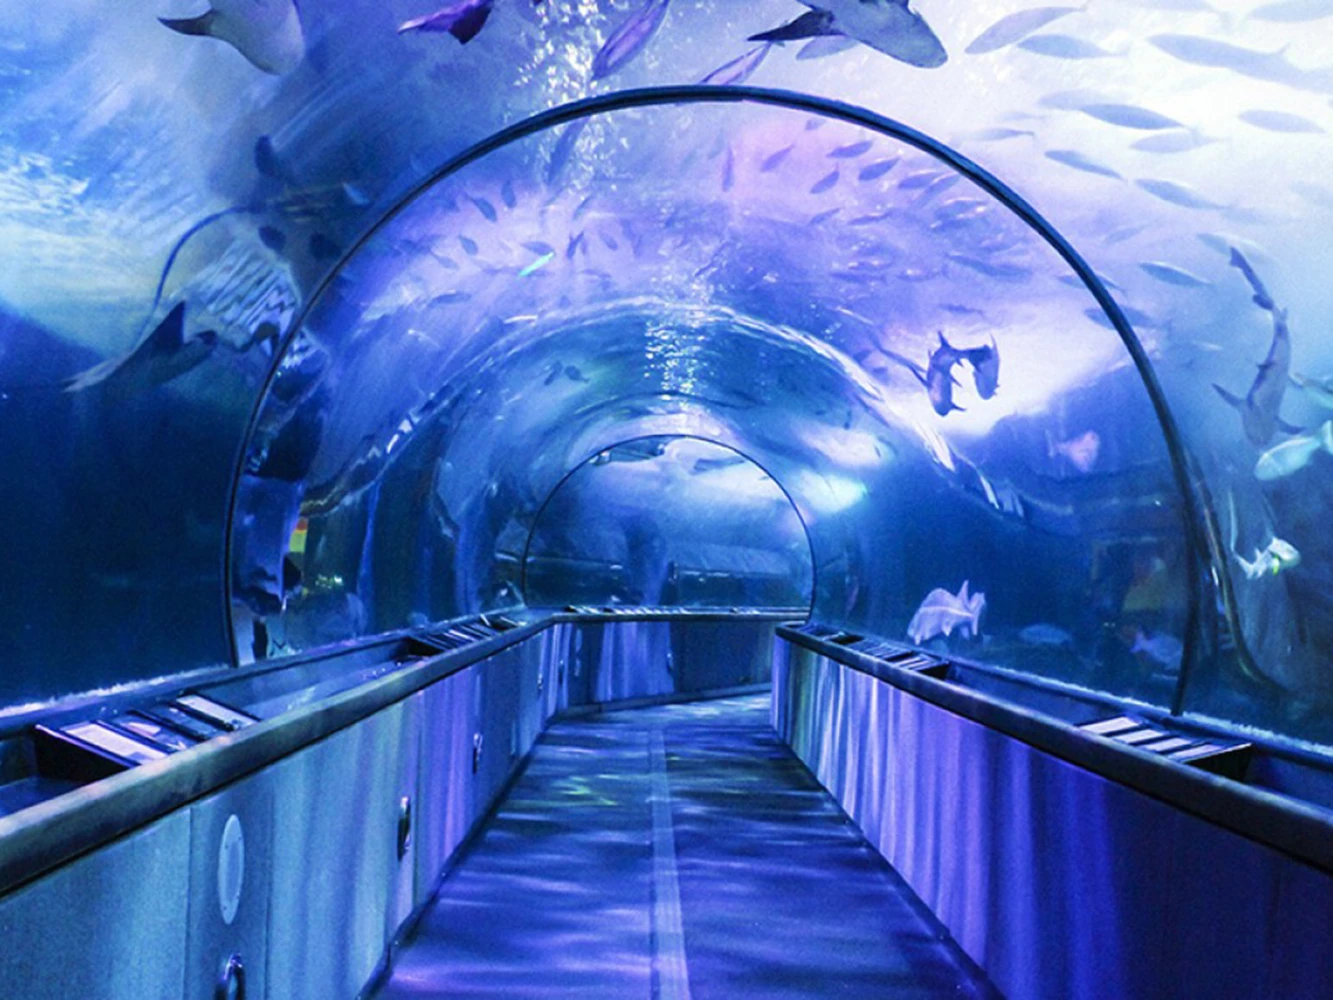 Aquarium of the Bay: What to expect - 2